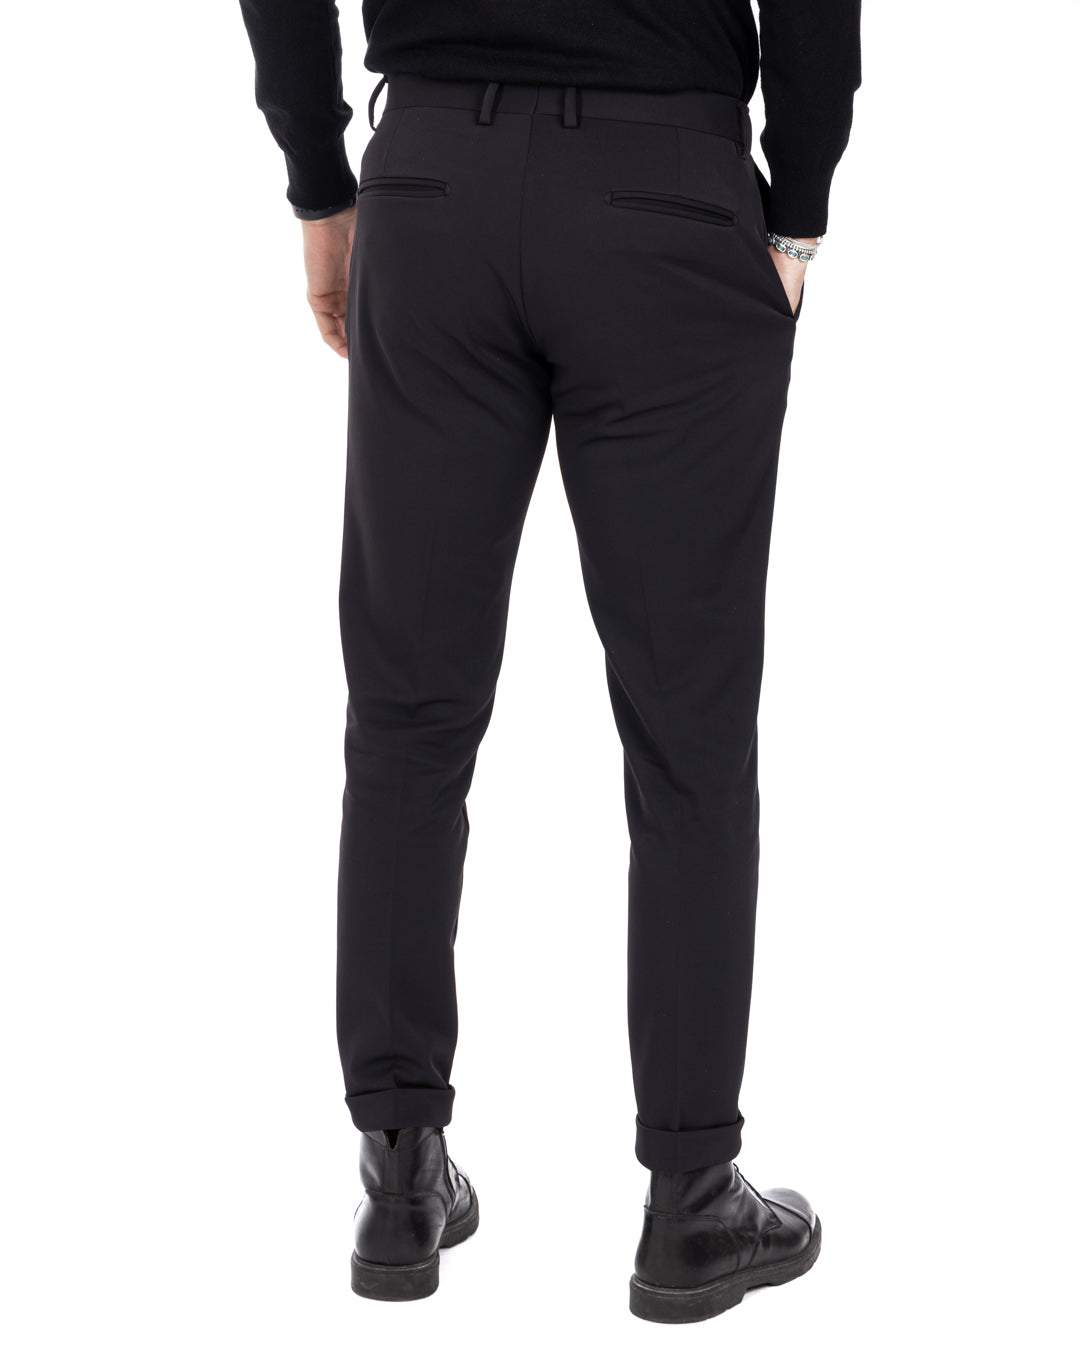 Smith - black technical trousers